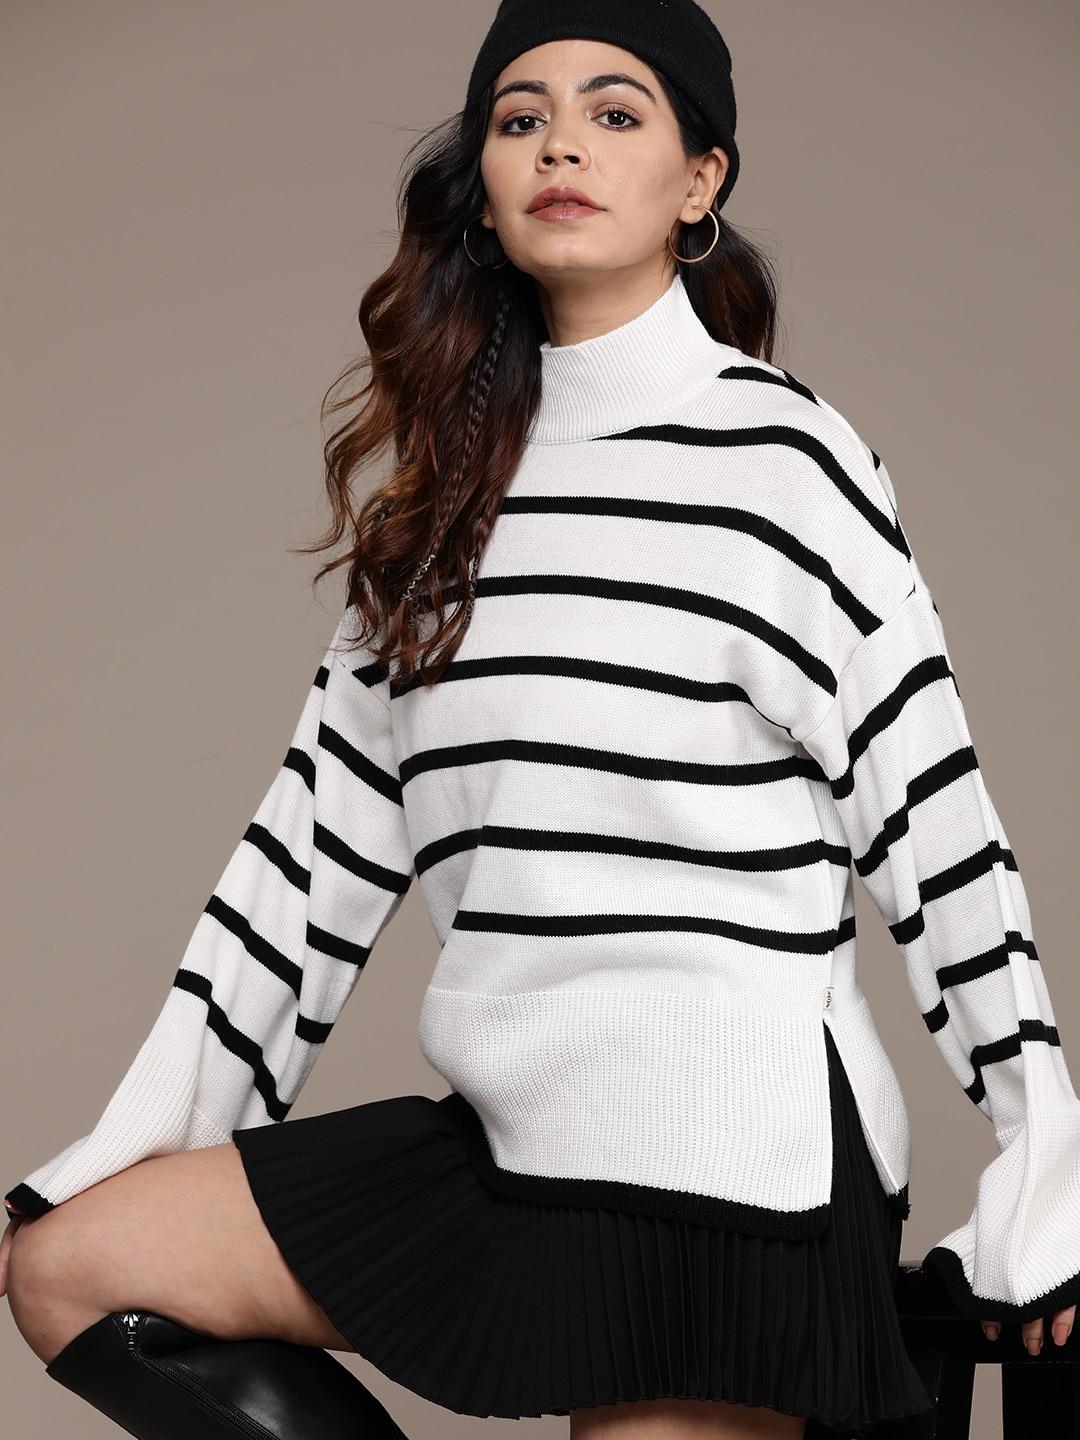 the-roadster-lifestyle-co.-flared-sleeves-striped-pullover